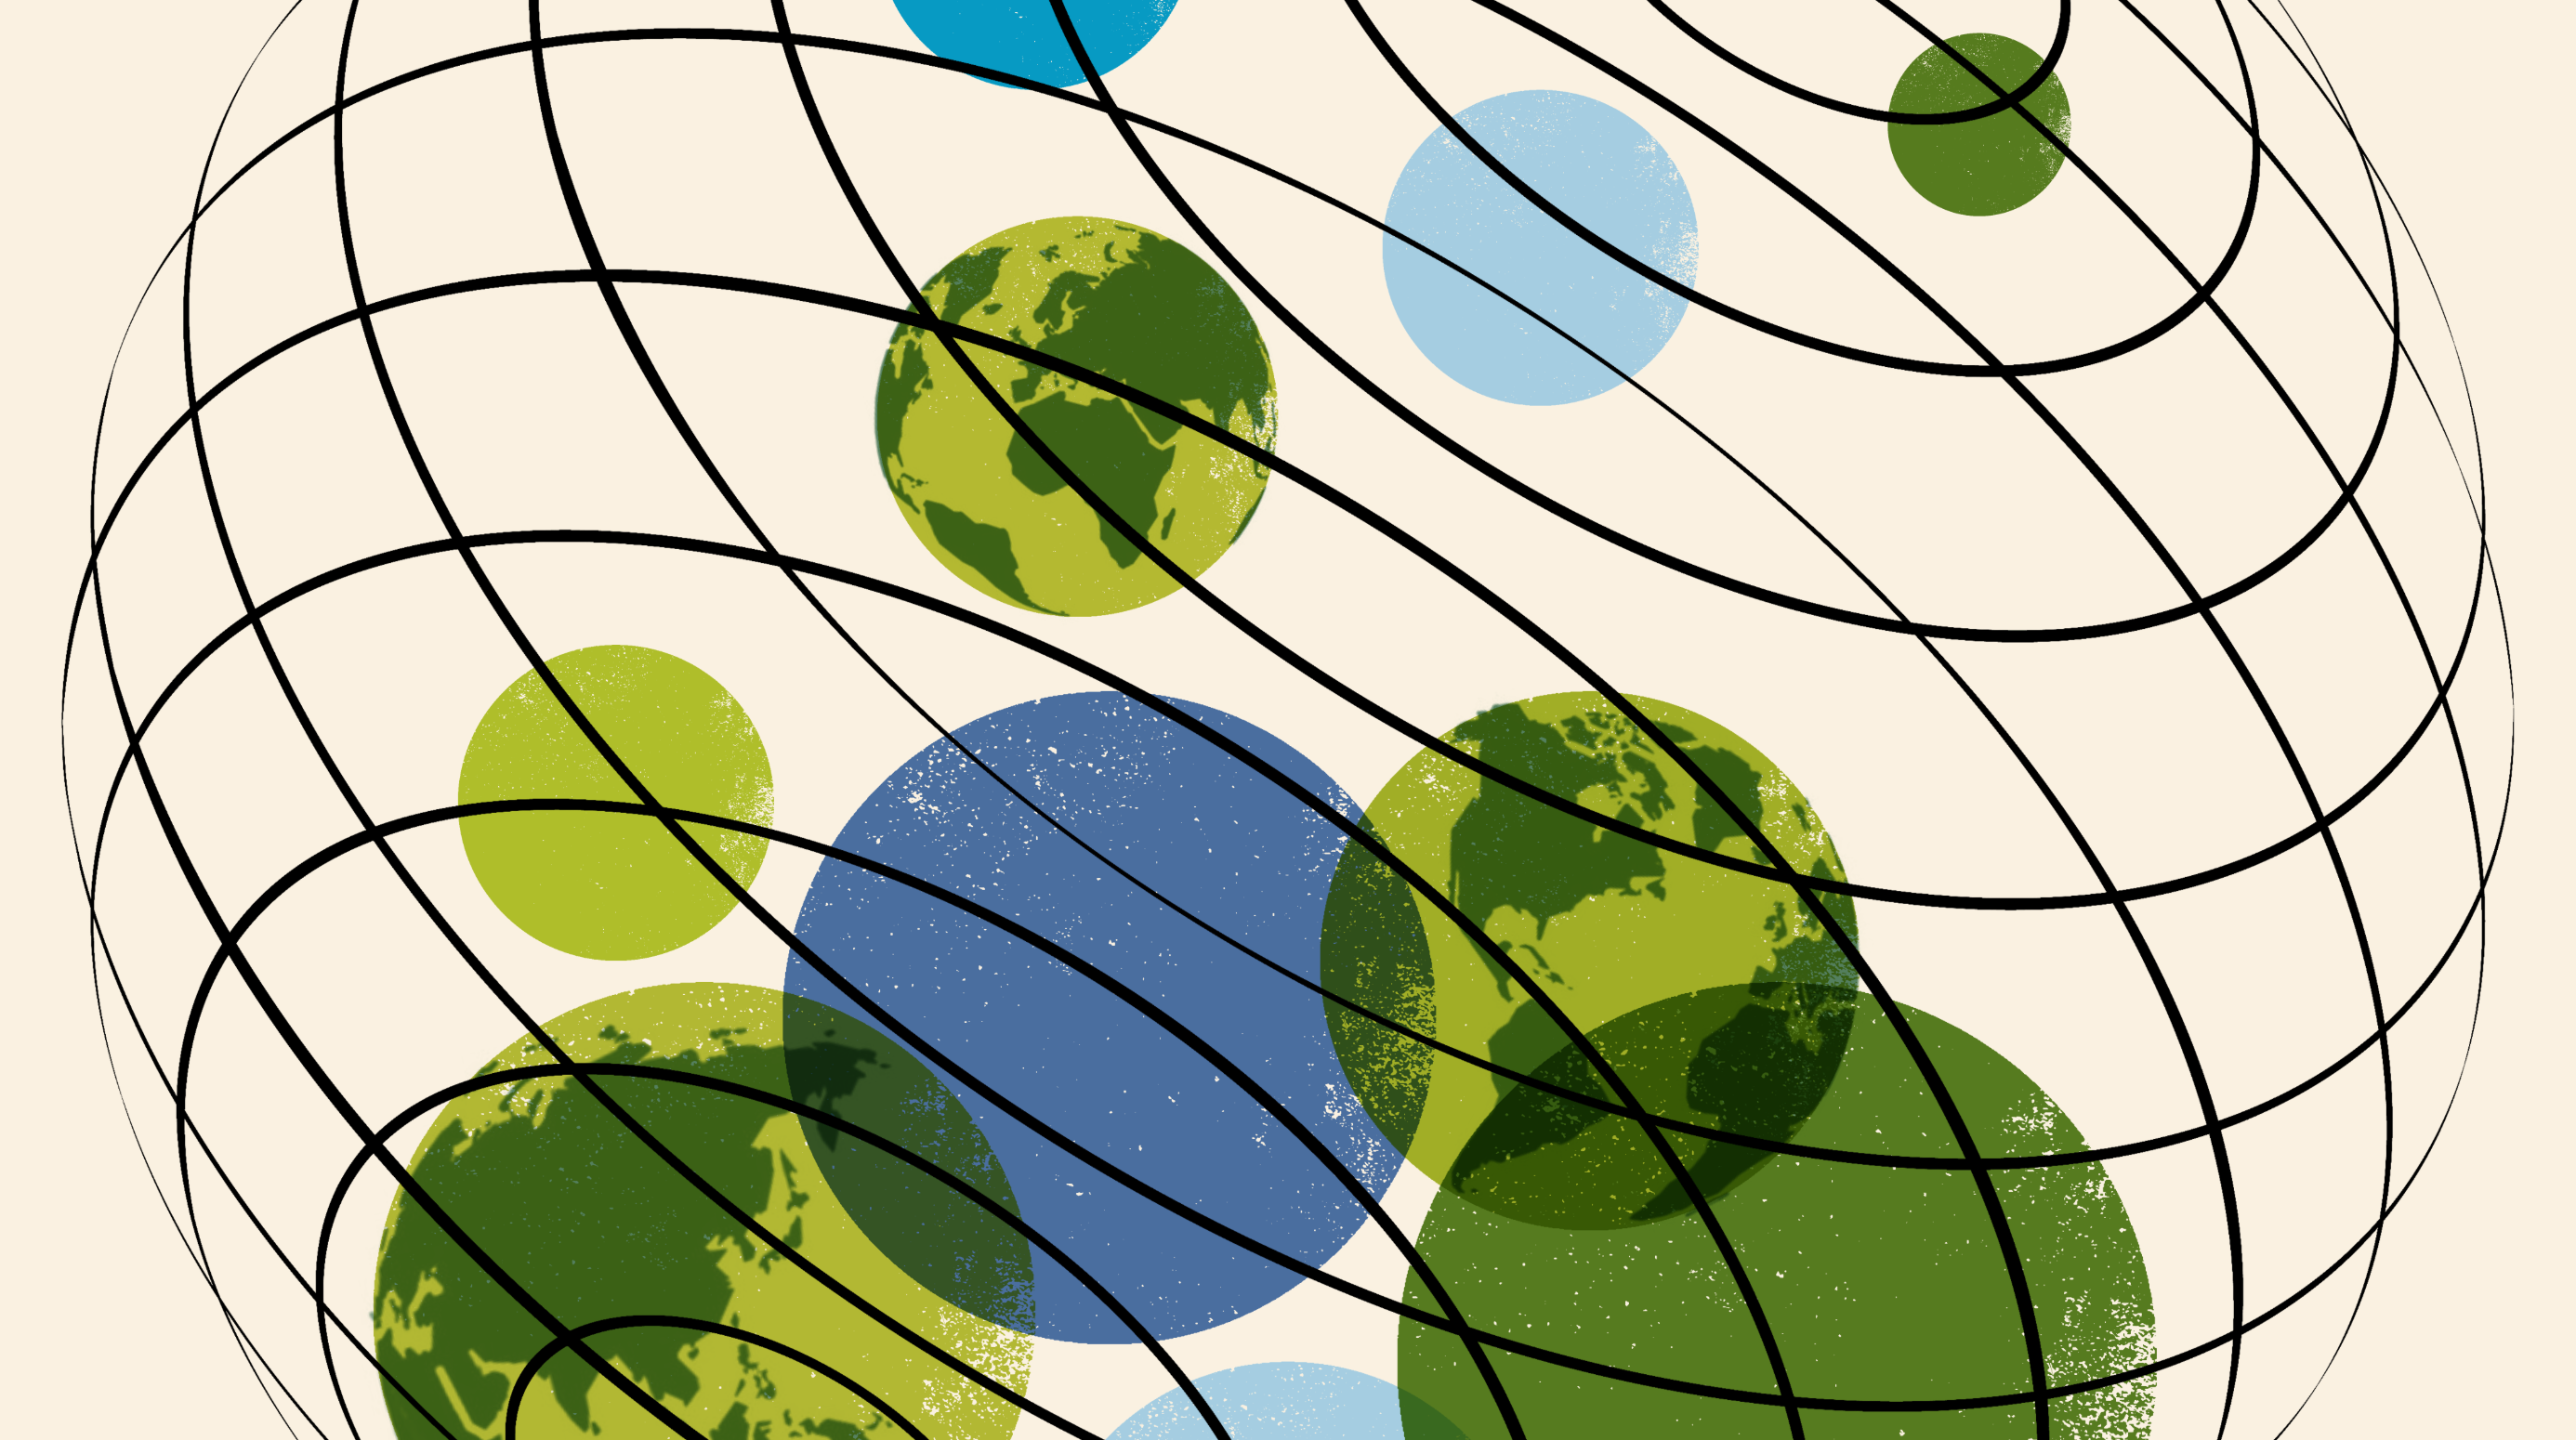 An illustration of spheres suggestive of globes